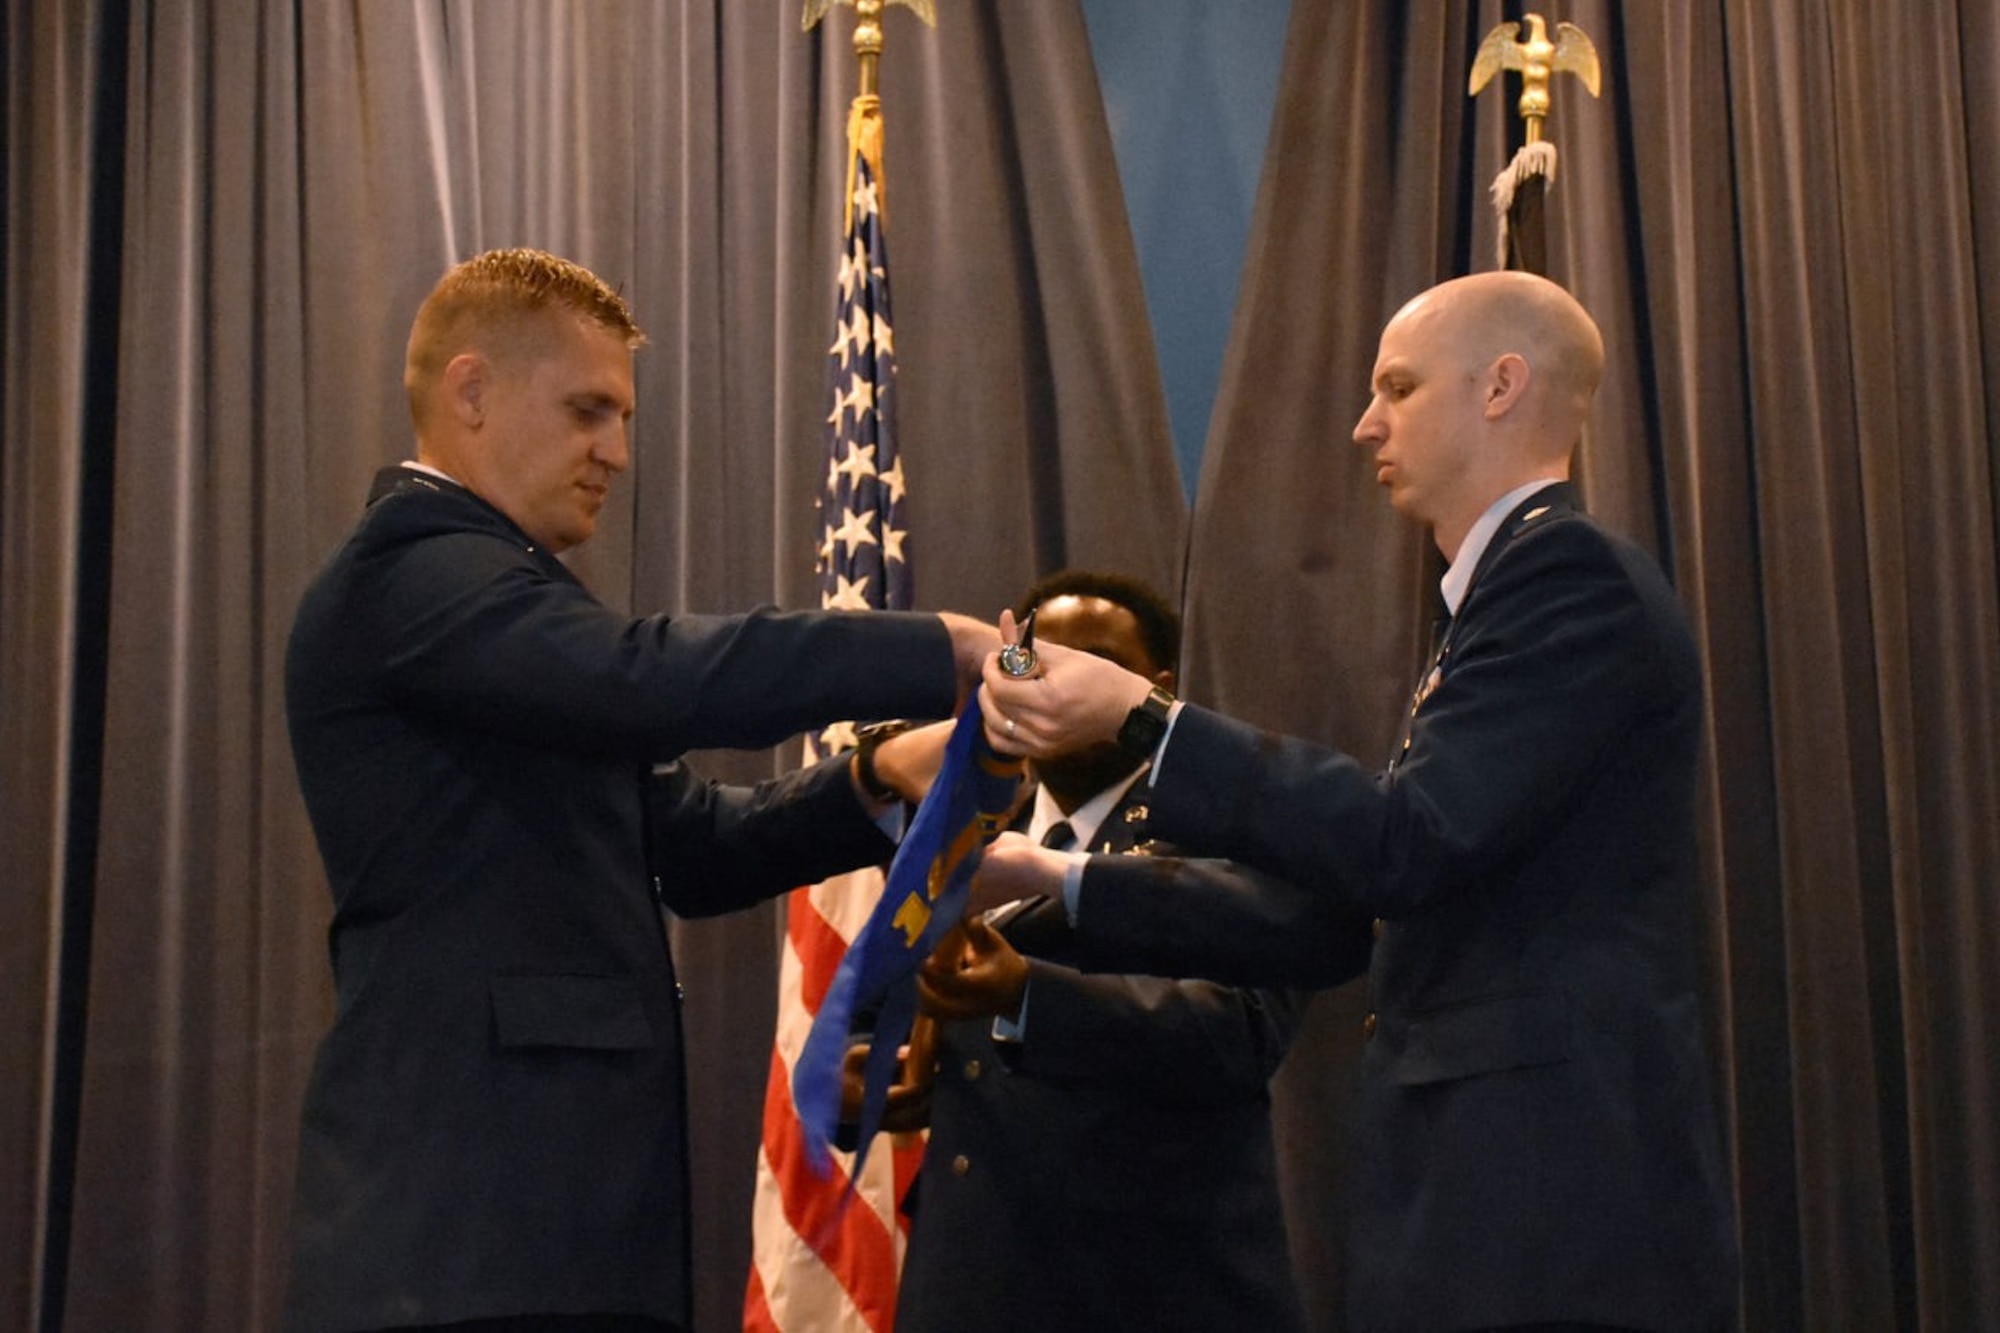 U.S. Space Force Lt. Col. Matthew Lintker, 18th Space Defense Squadron commander, left, U.S. Space Force Lt. Col. Jonathan Smith, special assistance to the Space Delta 2 commander, right, and Tech. Sgt. Anthony Childers, 19 SDS orbital analyst, furl a flag during a ceremony at Naval Support Facility Dahlgren, Va.,  April 6, 2022, that saw the deactivation of the 18th Space Control Squadron Detachment One and the activation of the 19th Space Defense Squadron. The 19 SDS is responsible for providing continuous Space Domain Awareness (SDA) for government, civilian, and international users and to maintain continuous and transparent SDA to assure global freedom of action in space. The 19 SDS and the 18 SDS were officially activated April 13. (U.S. Navy photos by CSSN Mariana Gonzalez)